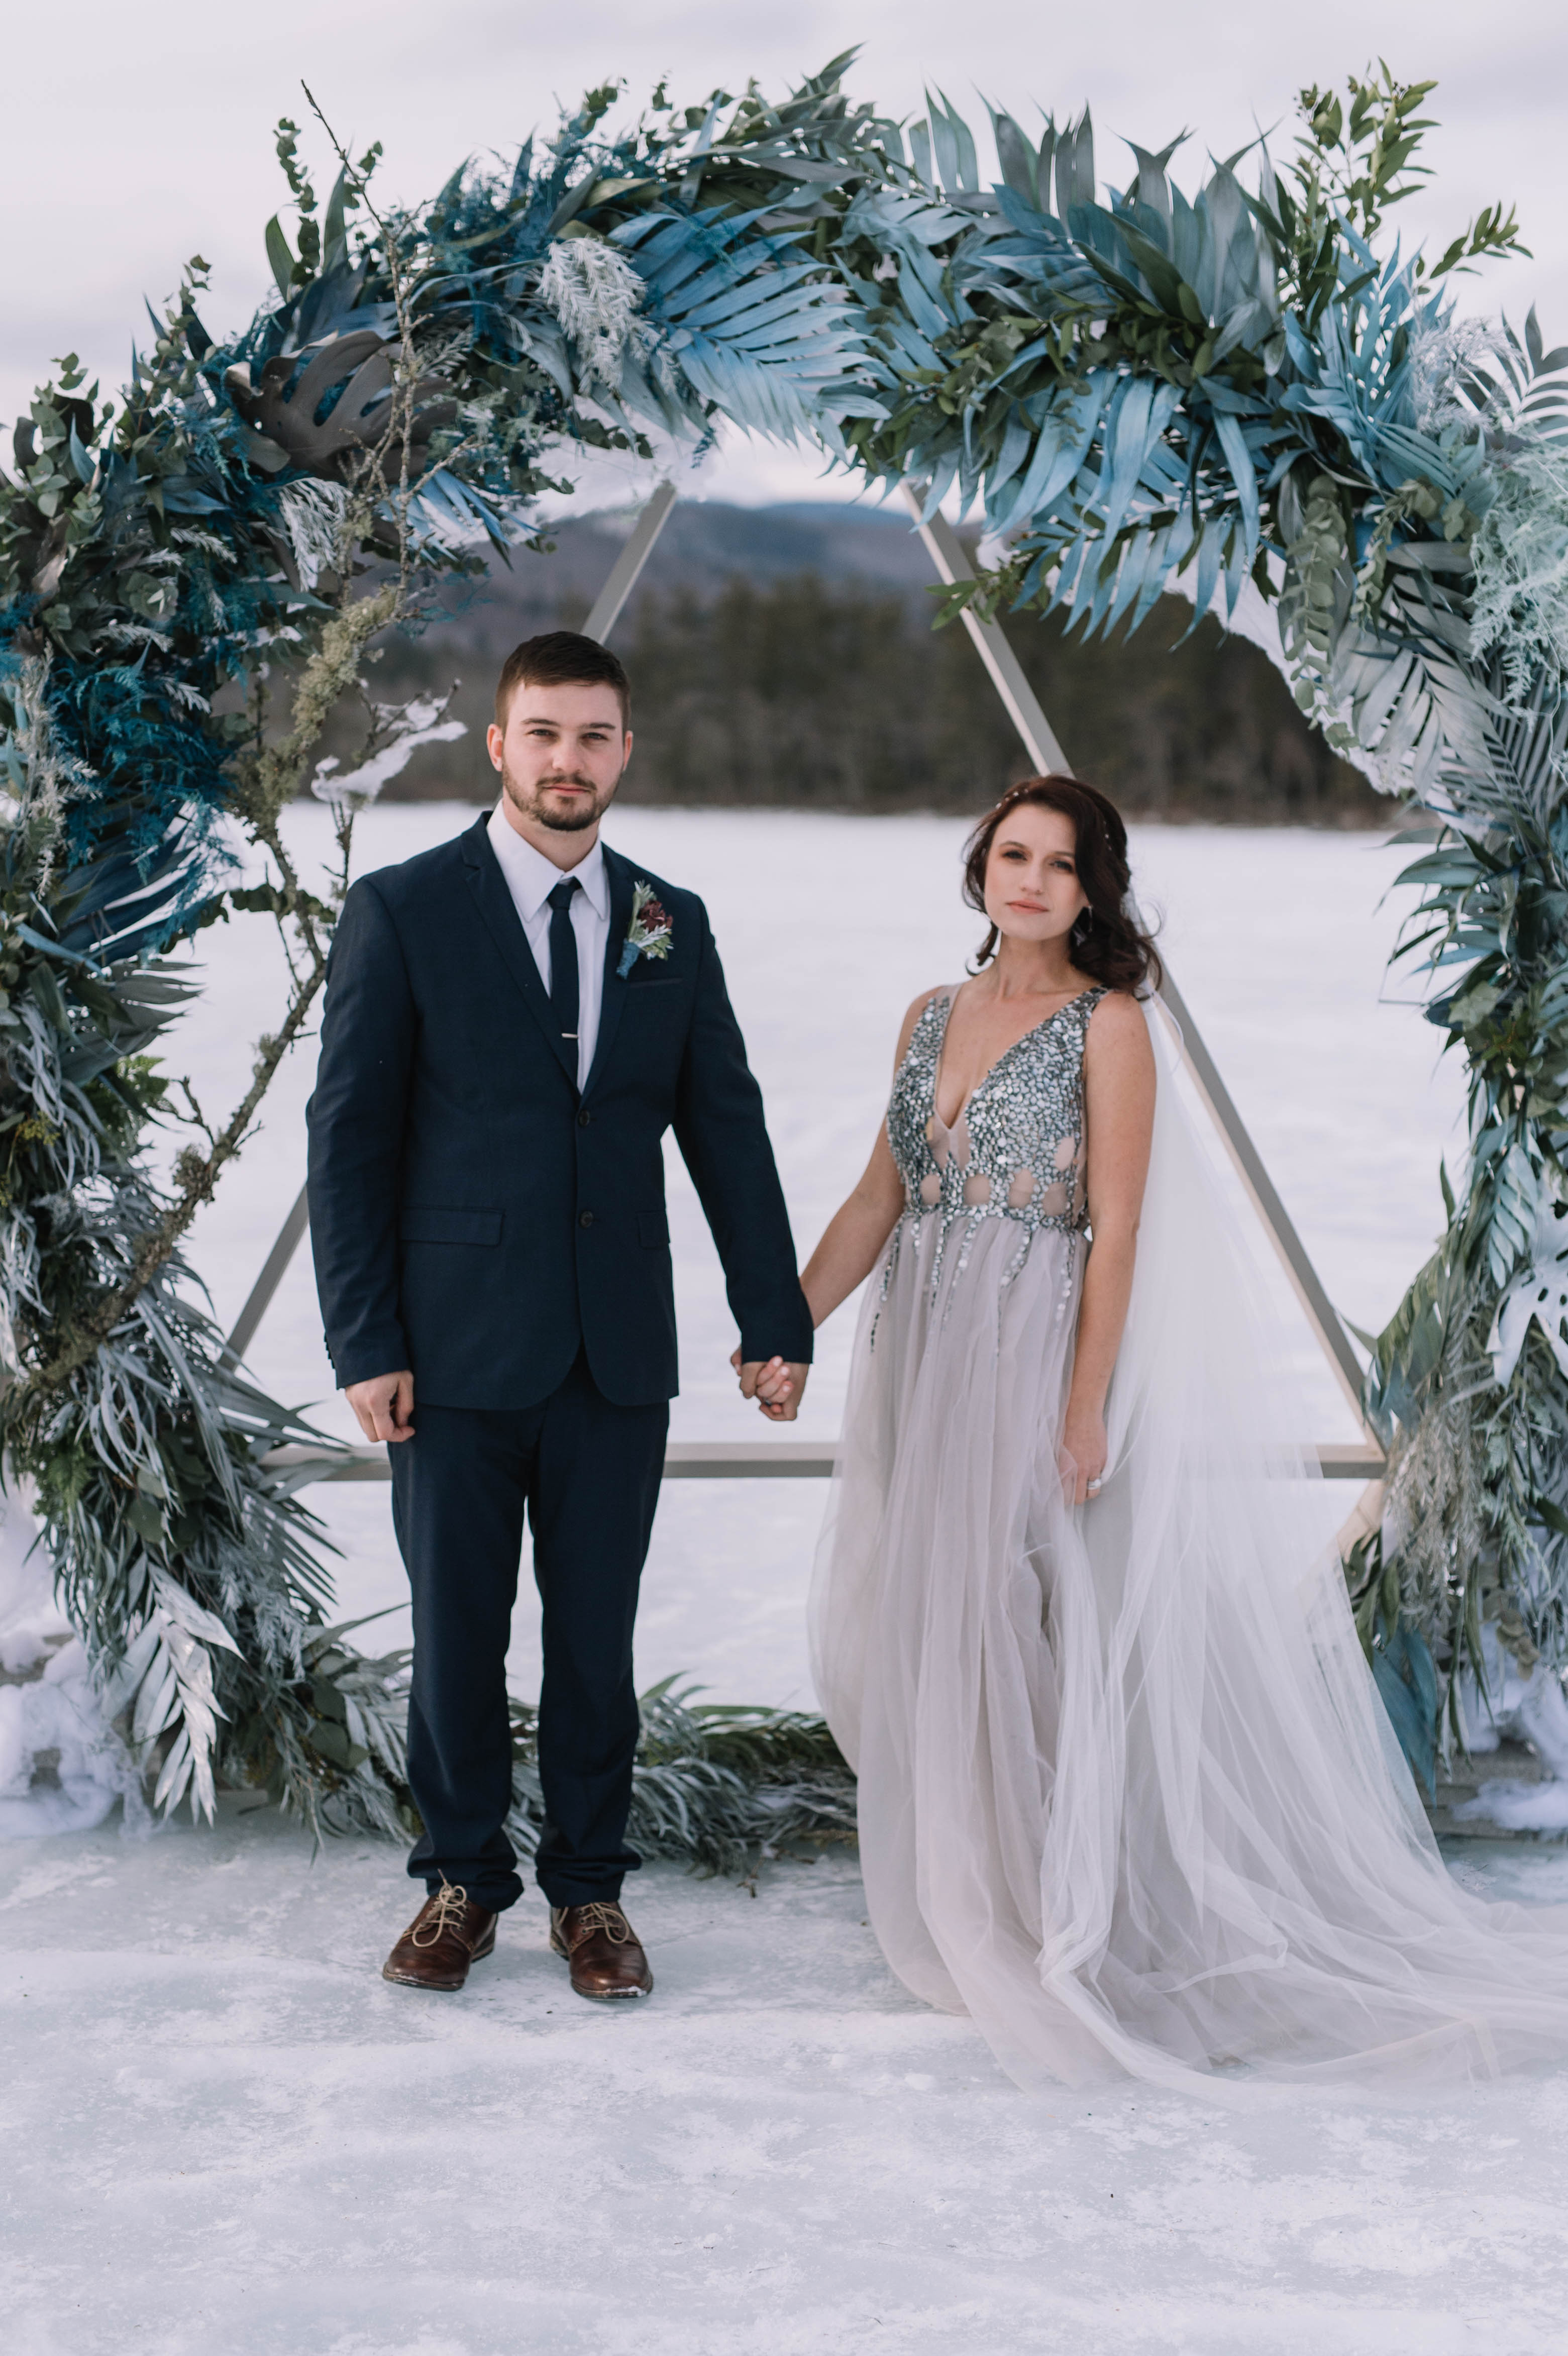 Icy Vow Renewal Full Gallery